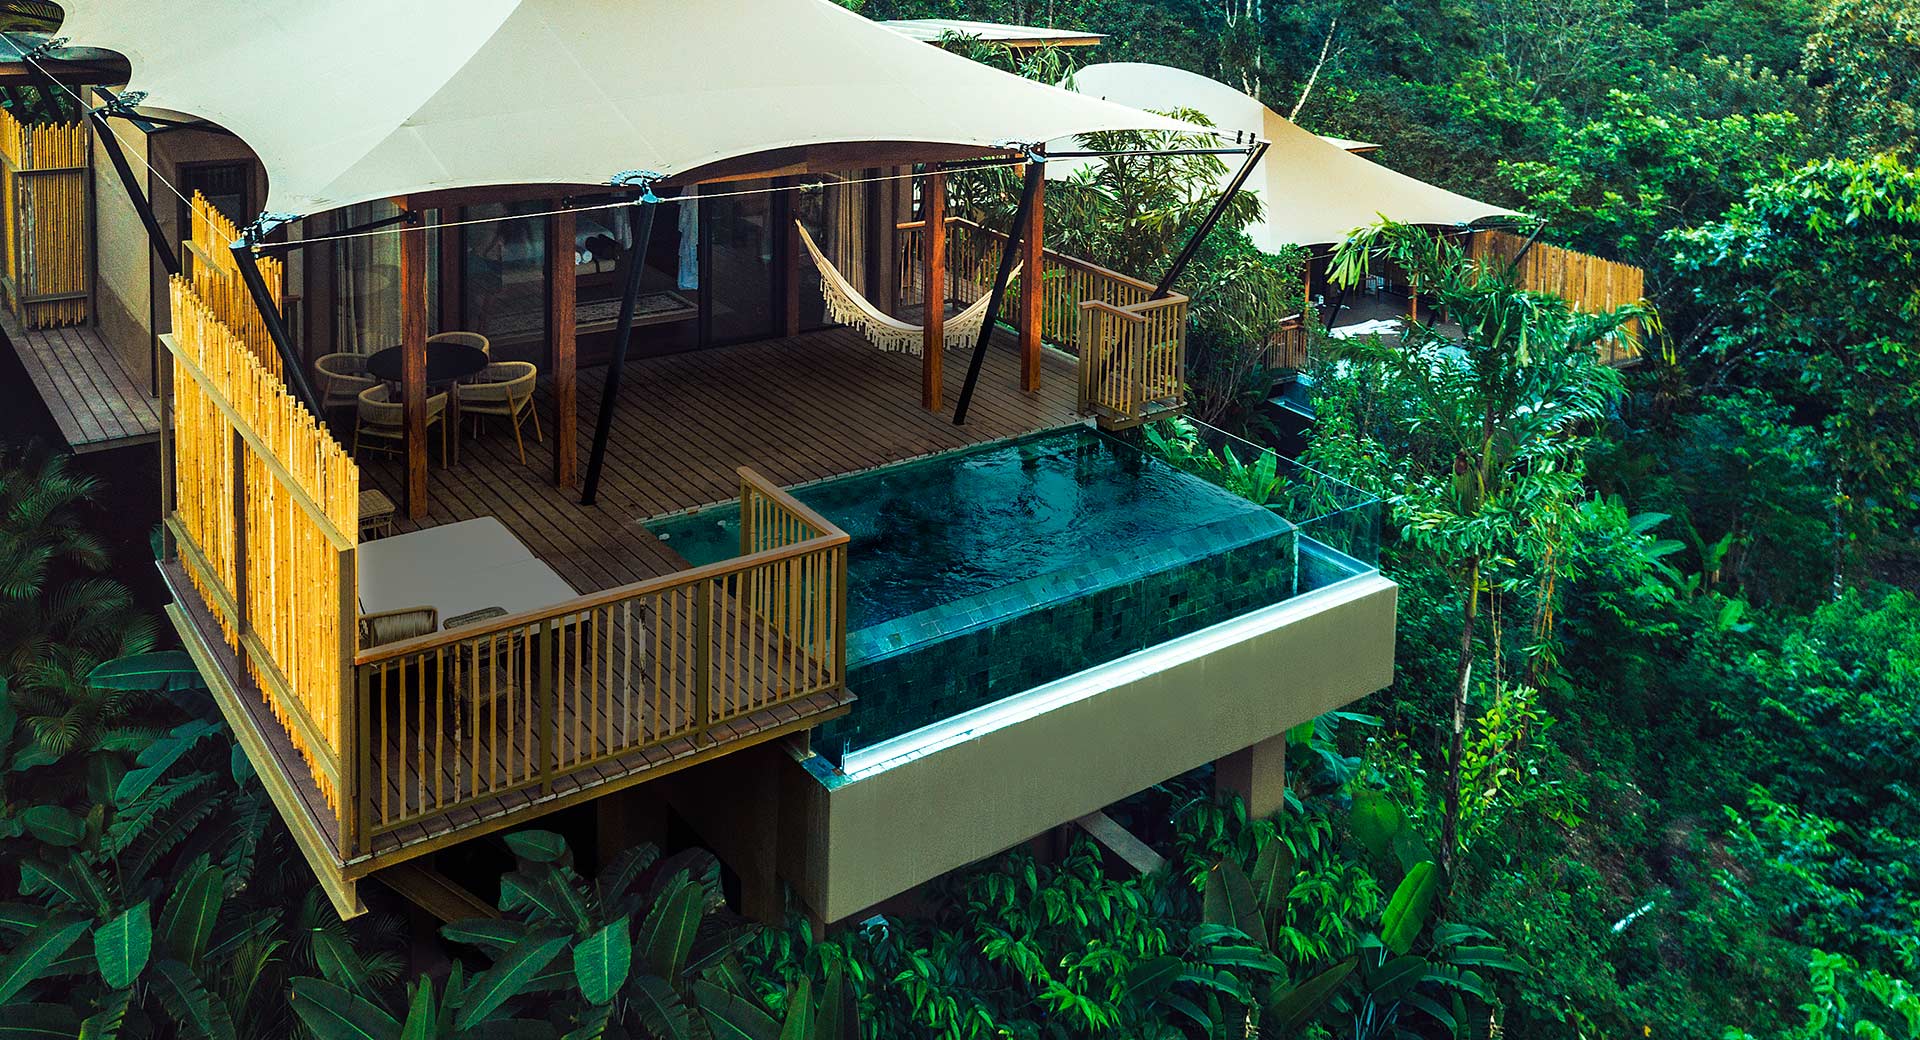 These Luxury Glamping Tents Allow You To Spend The Night In A Costa Rican Rainforest